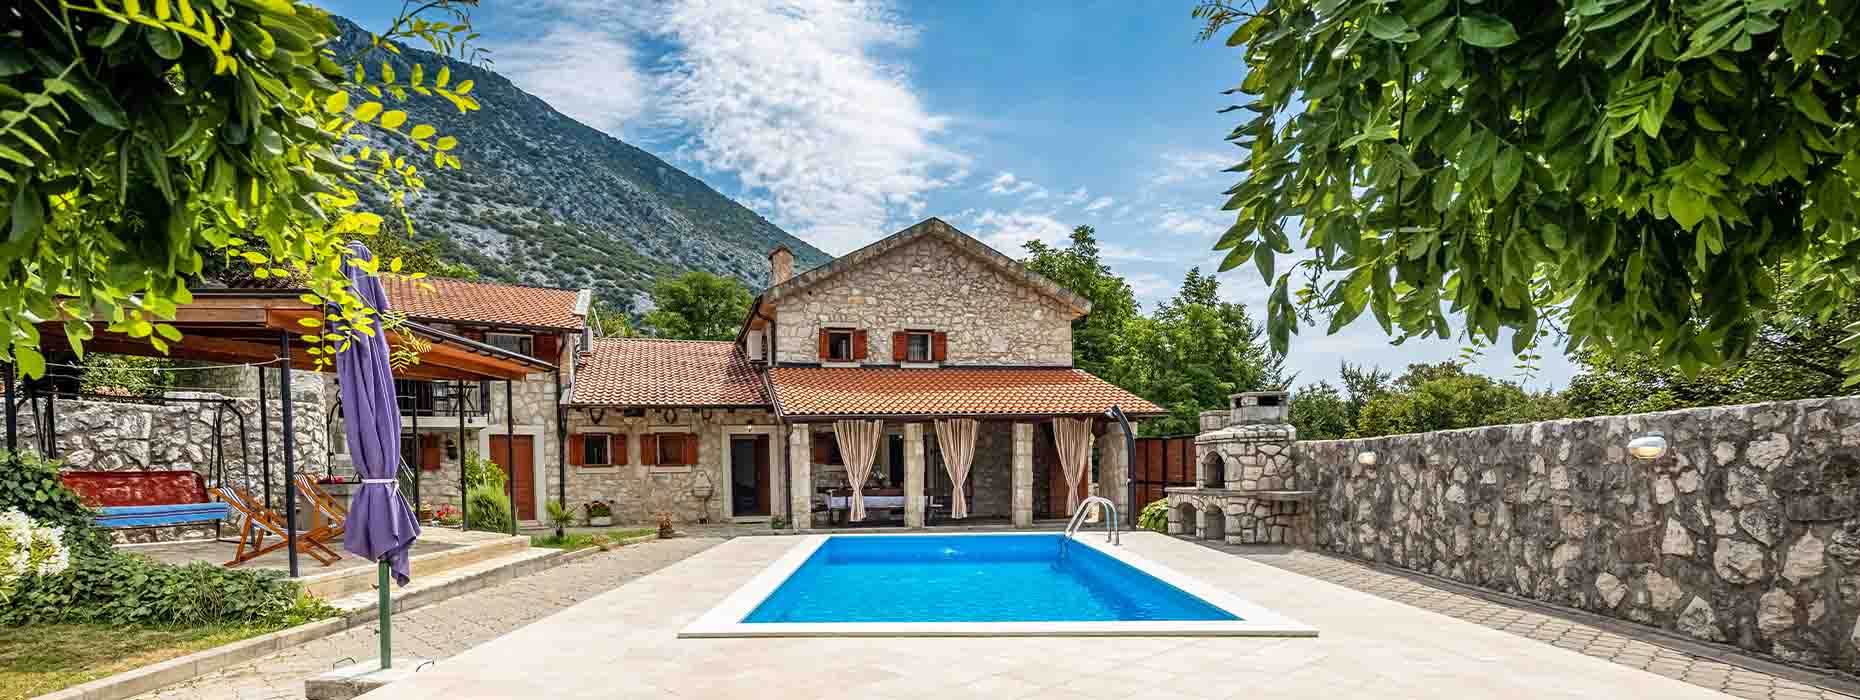 Mountain, holiday cottage and swimming pool